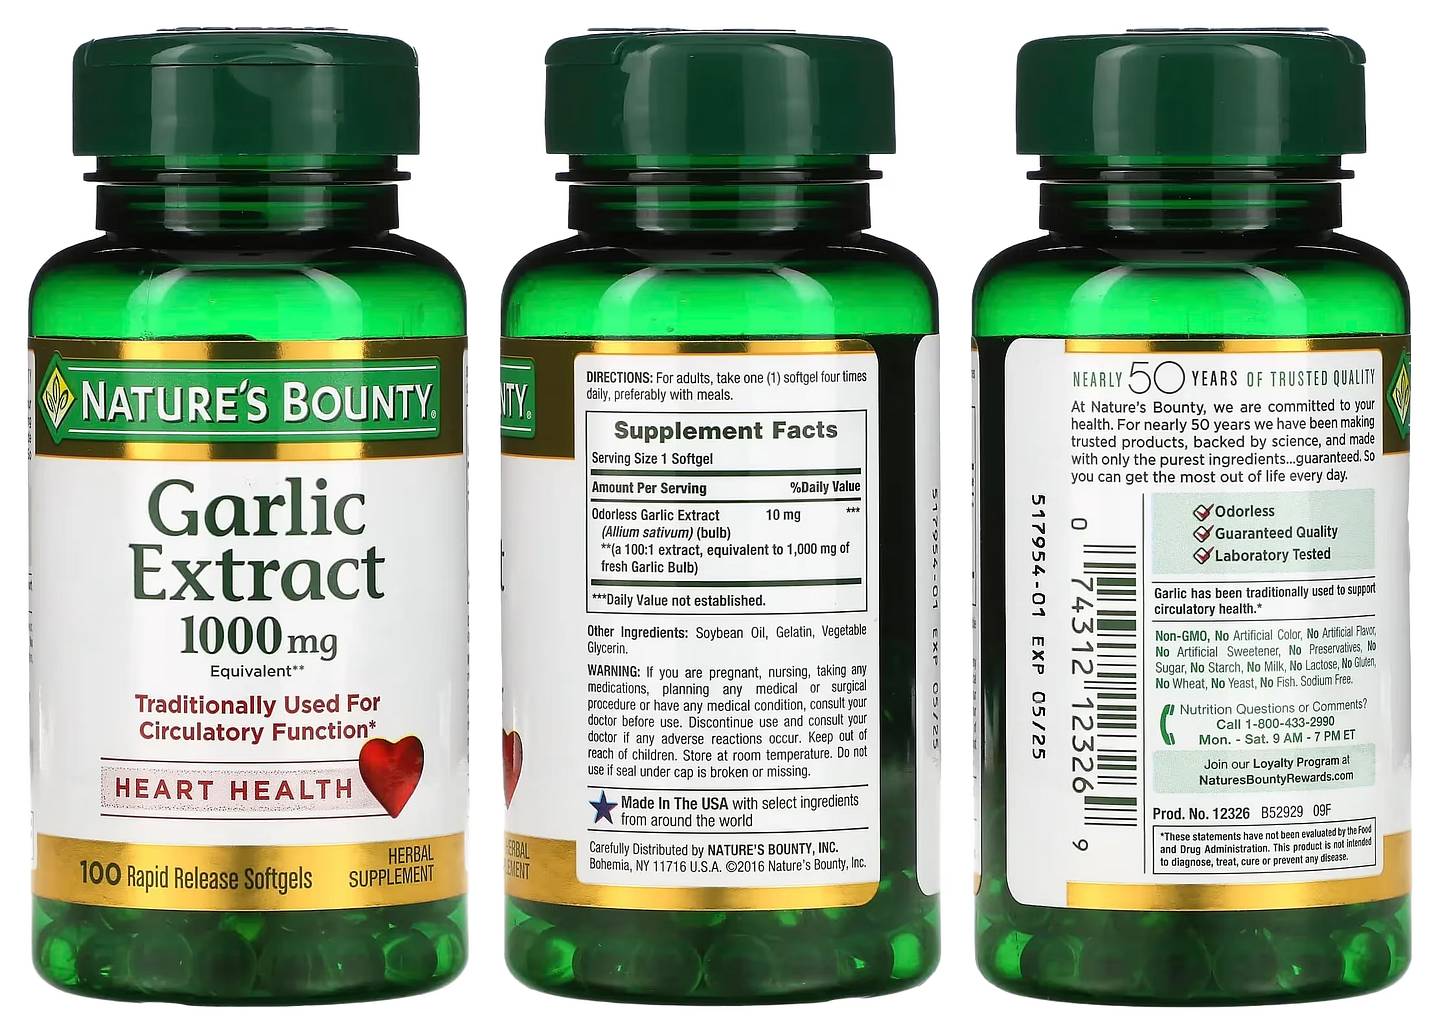 Nature's Bounty, Garlic Extract packaging